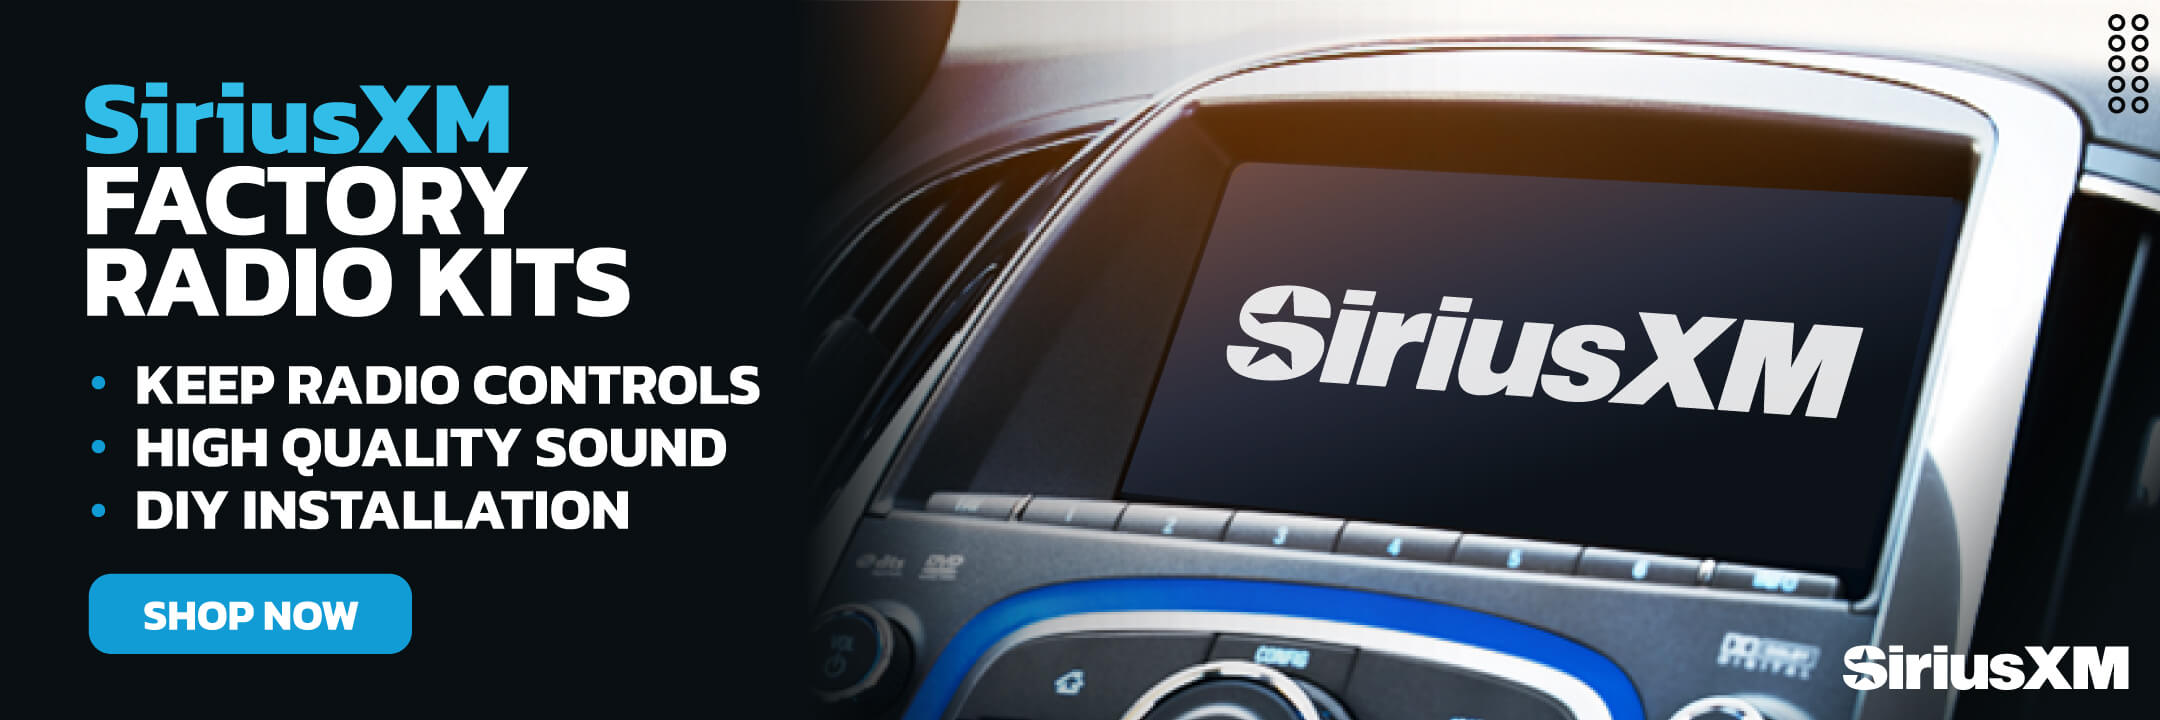 Get SiriusXM Satellite Radio on your factory stereo system